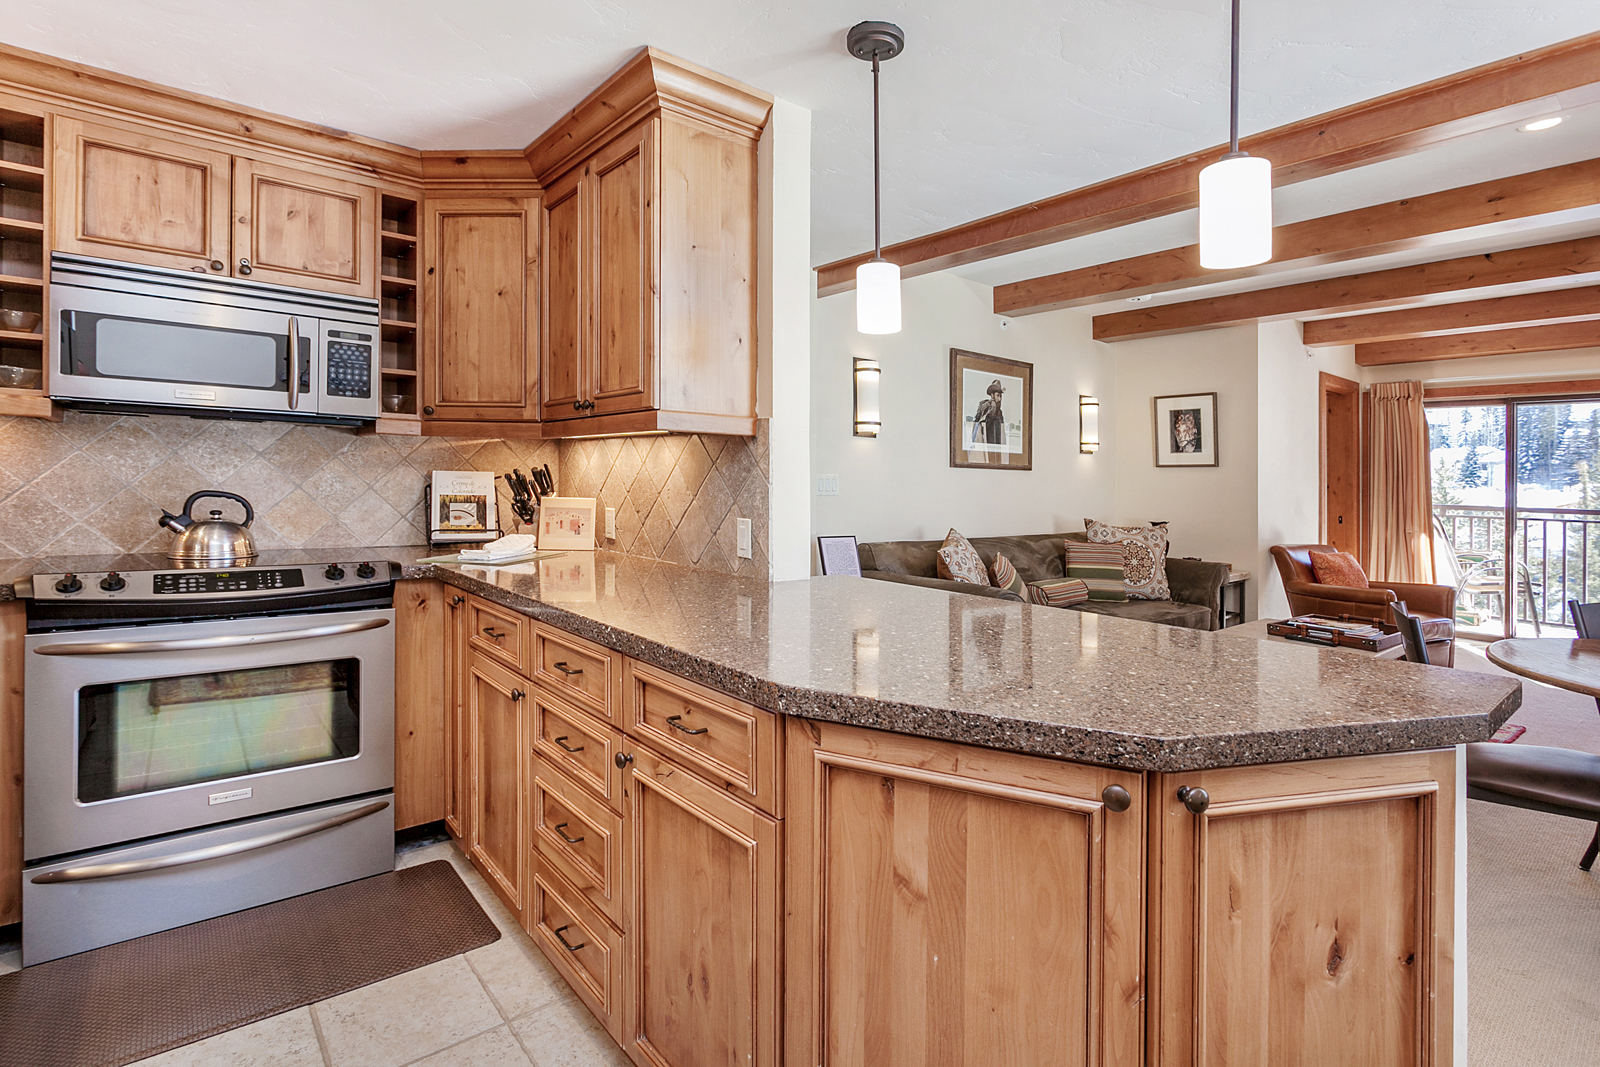 Antlers at Vail’s Platinum-ranked condominiums include full kitchens and dining rooms – and plenty of room to spread out – for a comfortable family Thanksgiving stay.